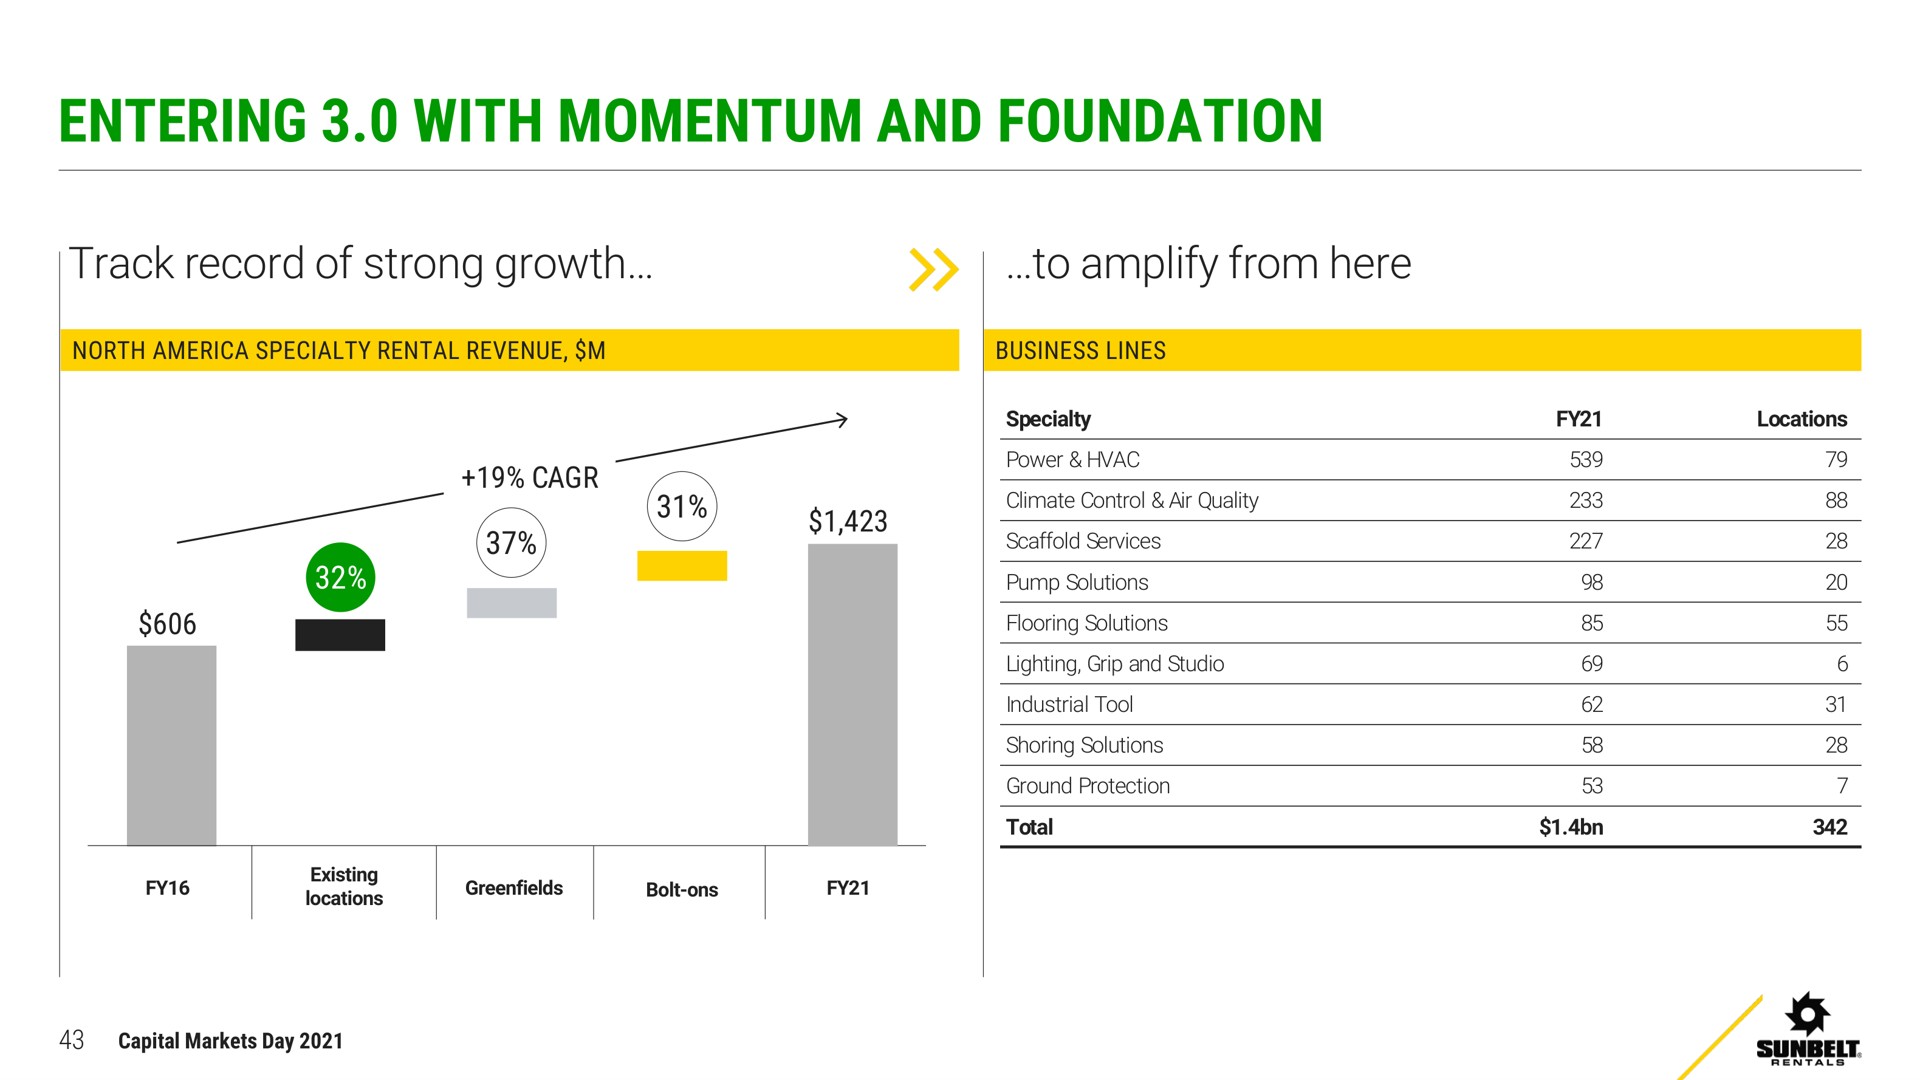 entering with momentum and foundation | Ashtead Group